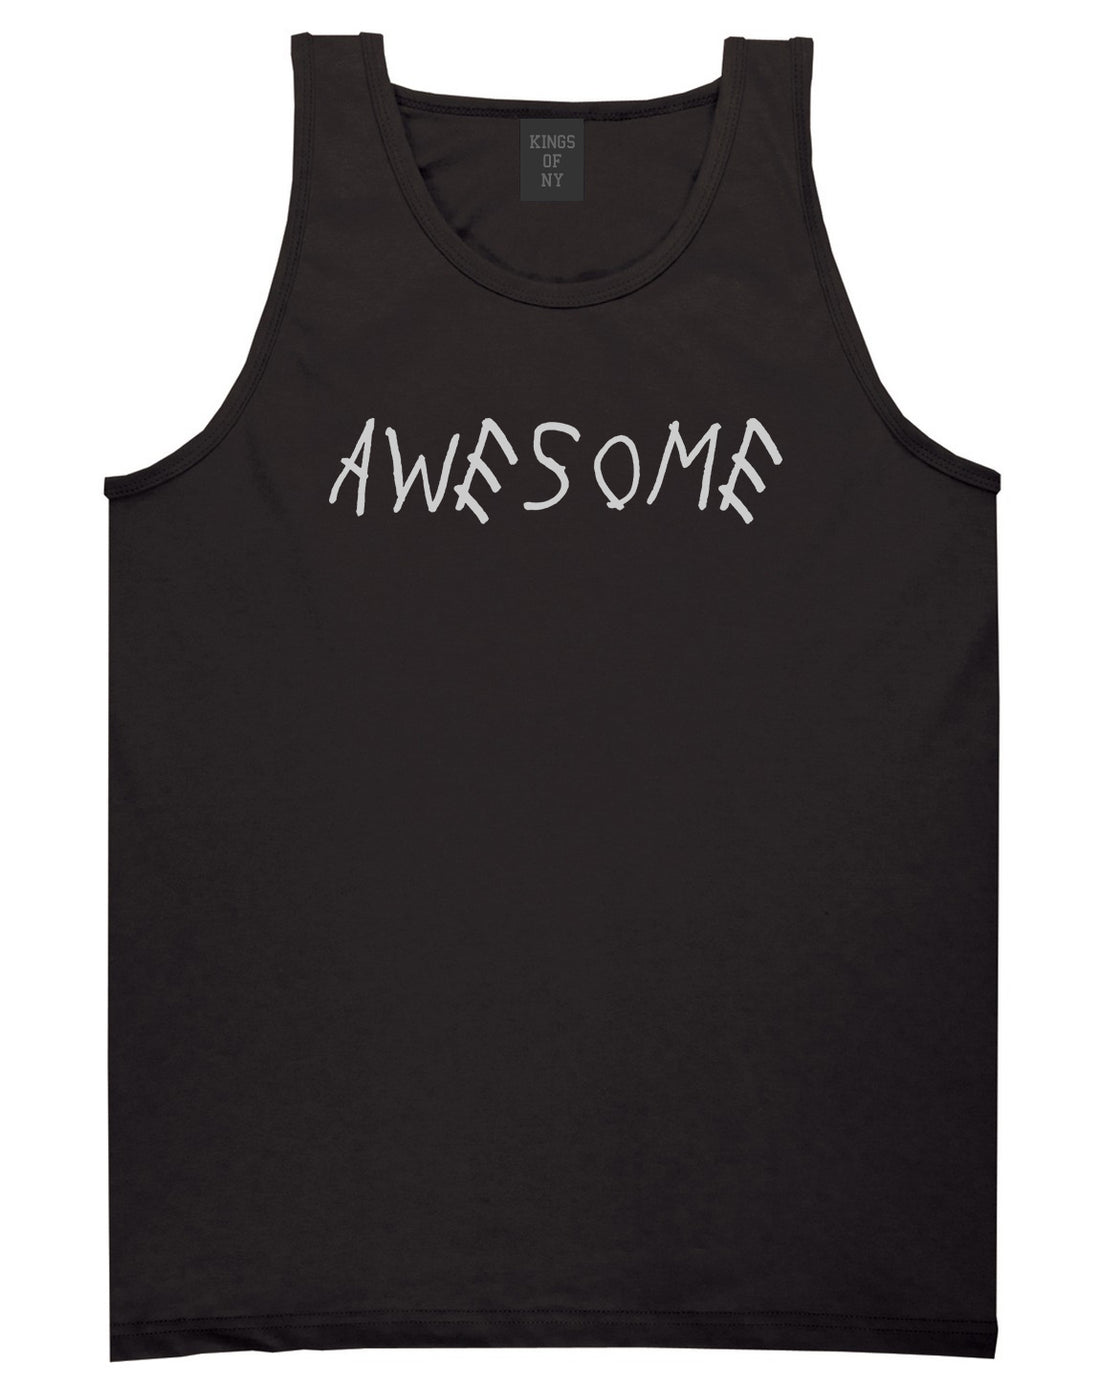 Awesome Black Tank Top Shirt by Kings Of NY